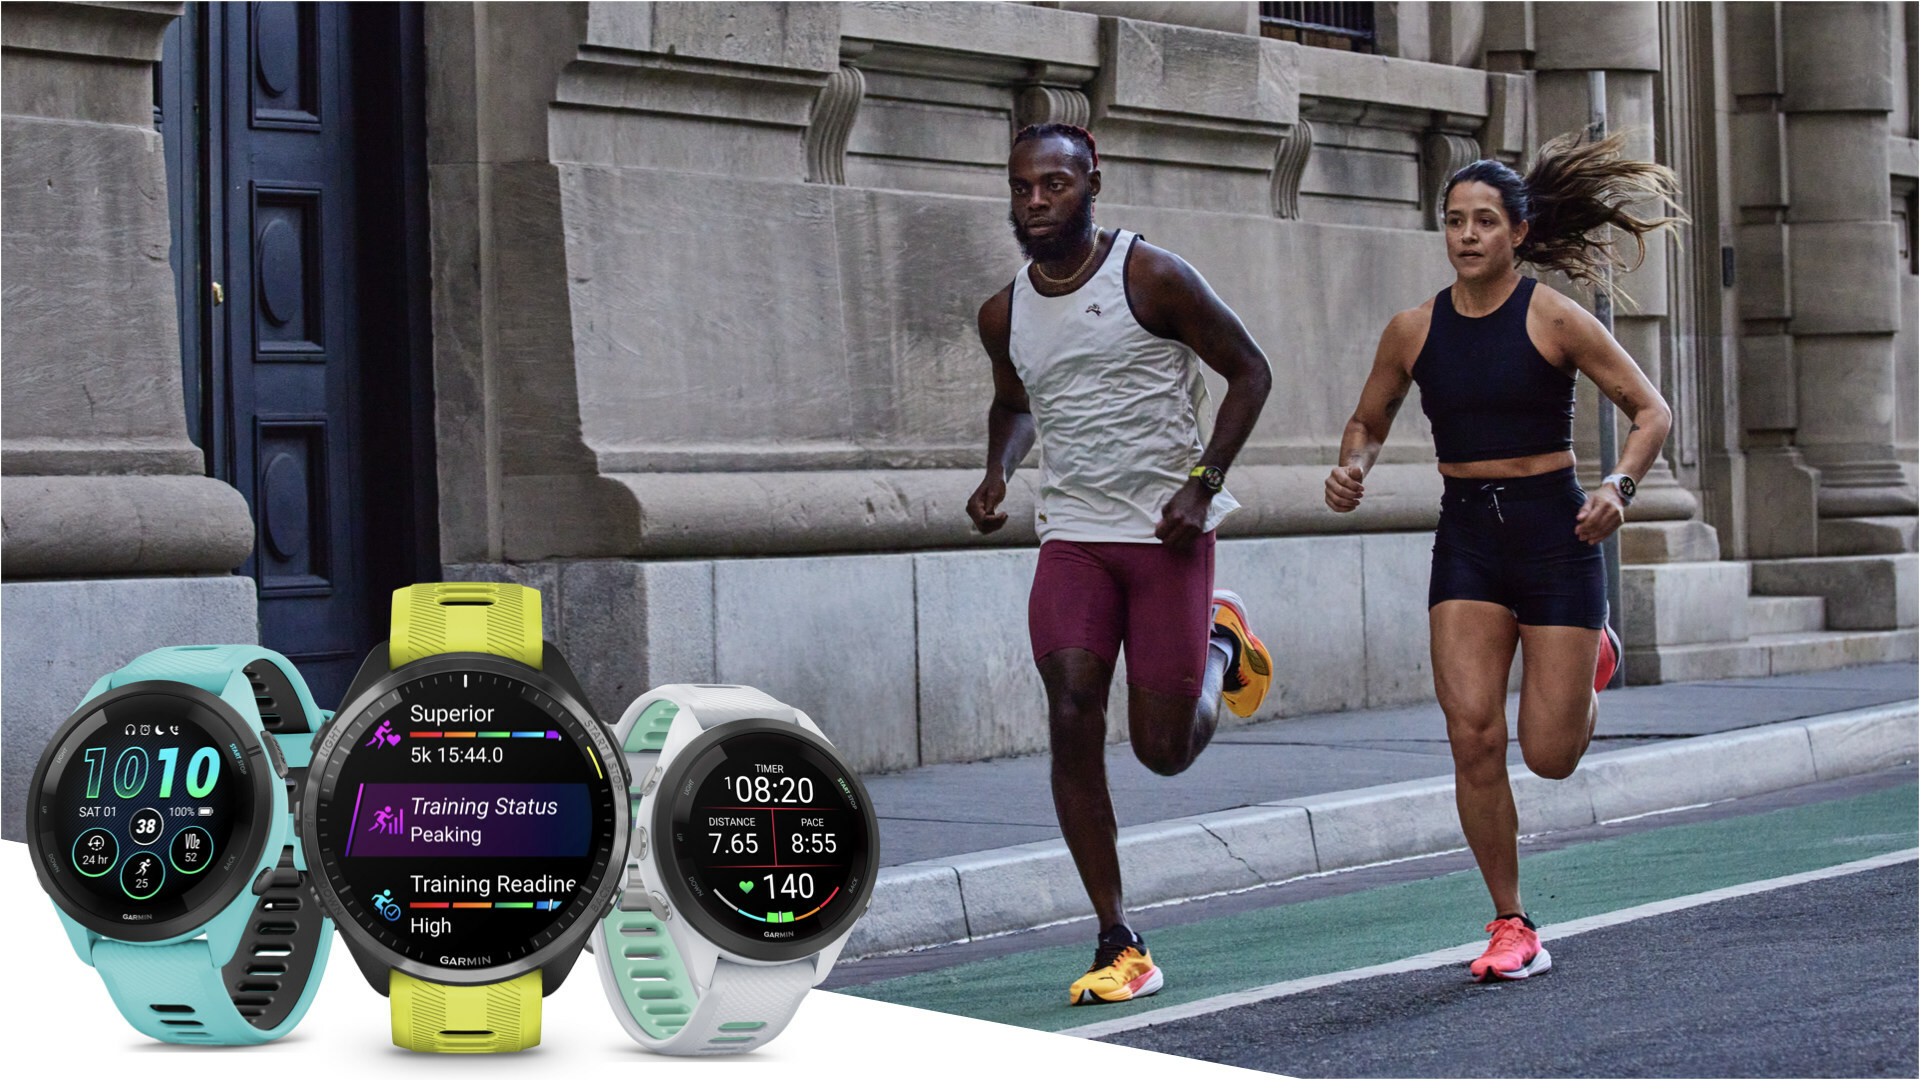 garmin-adds-vibrant-displays-to-its-forerunner-gps-smartwatches